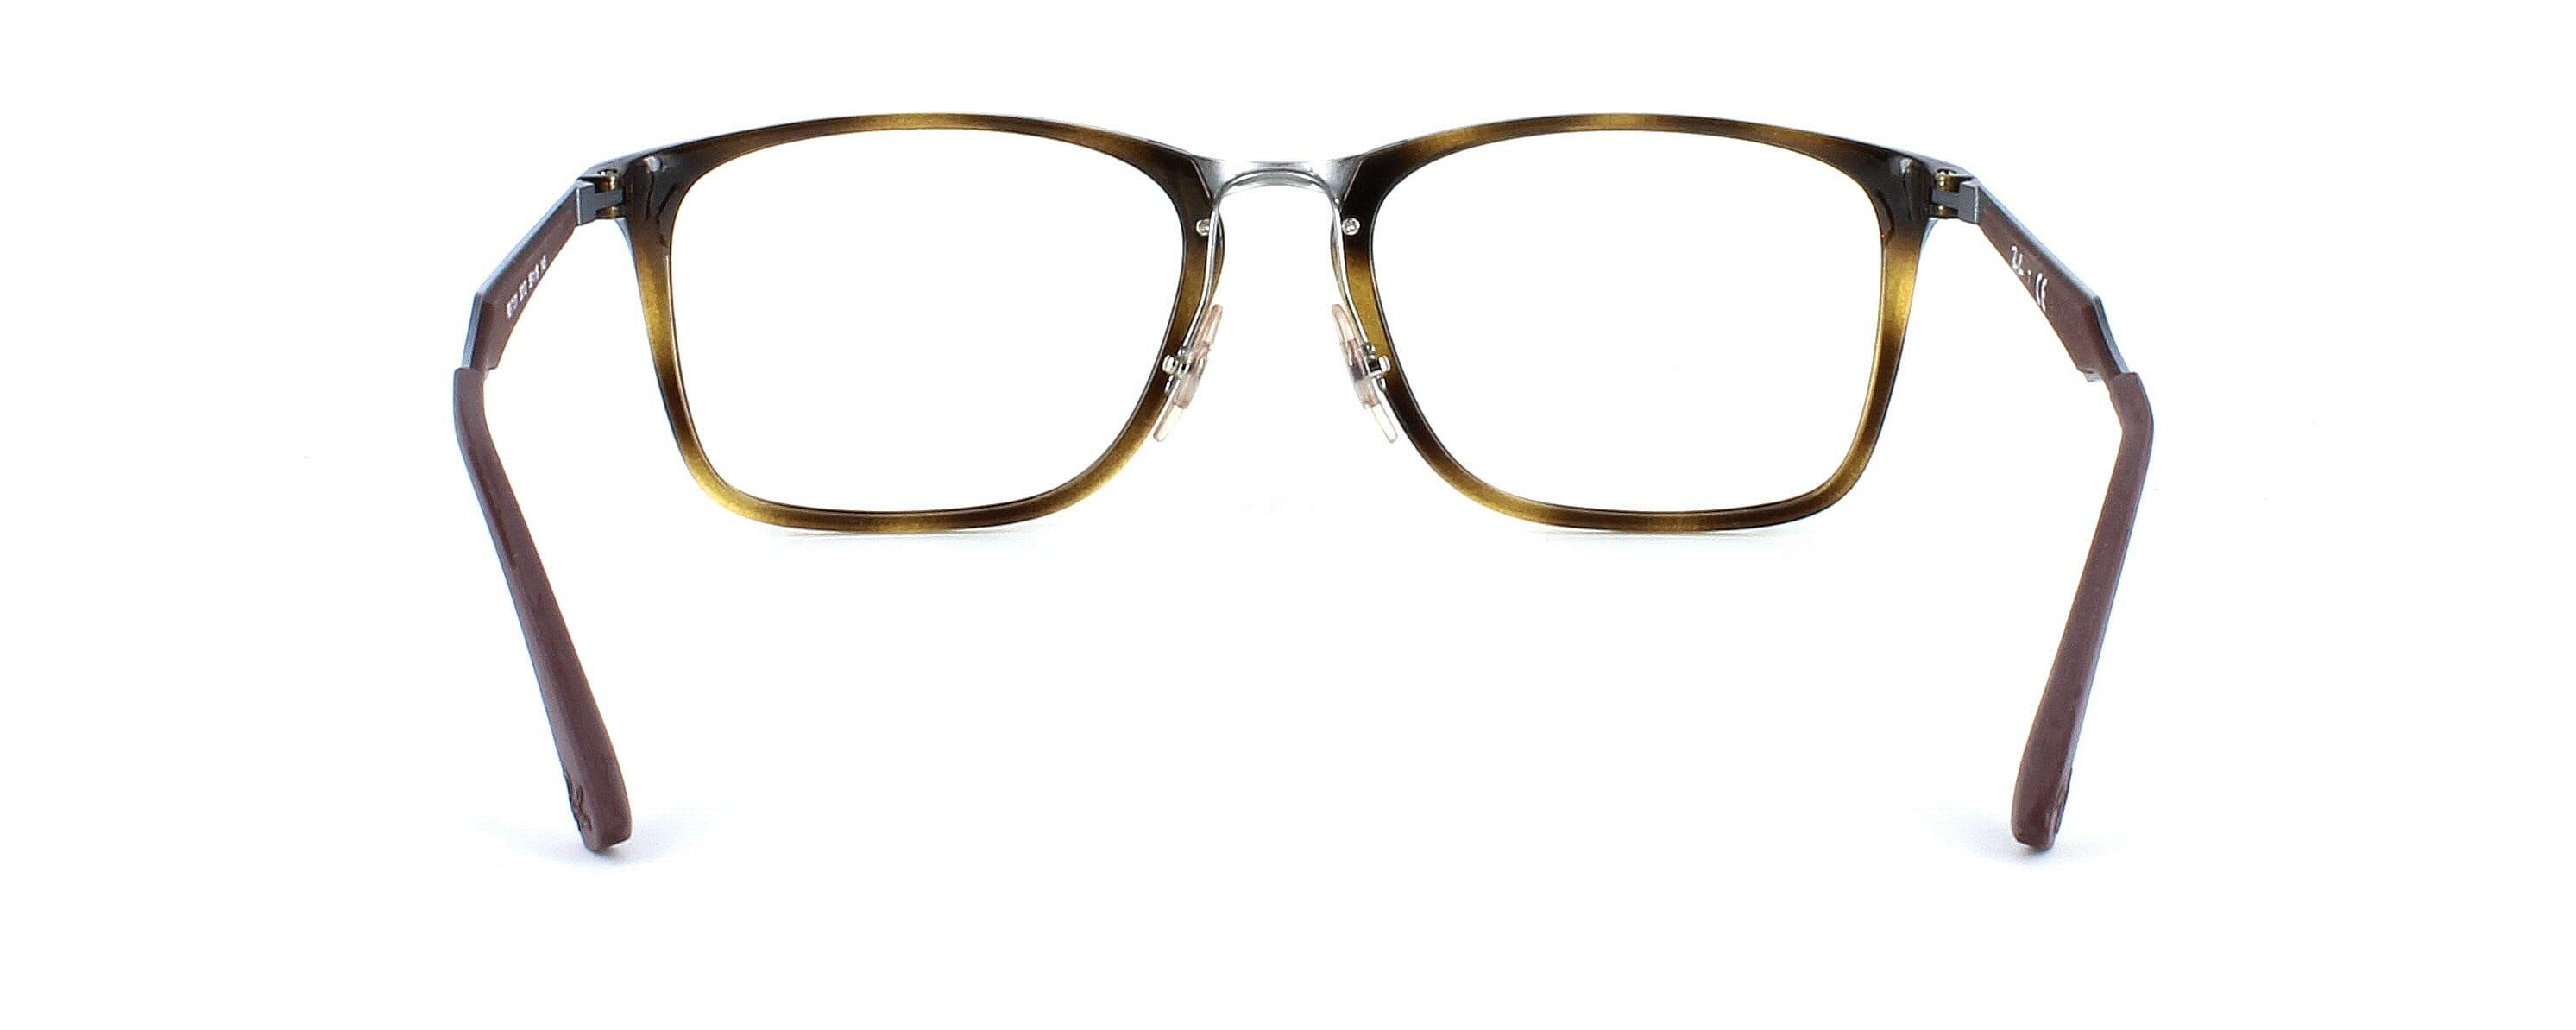 Ray Ban 7131 - Gent's tortoise acetate with metal nose bridge - image view 4